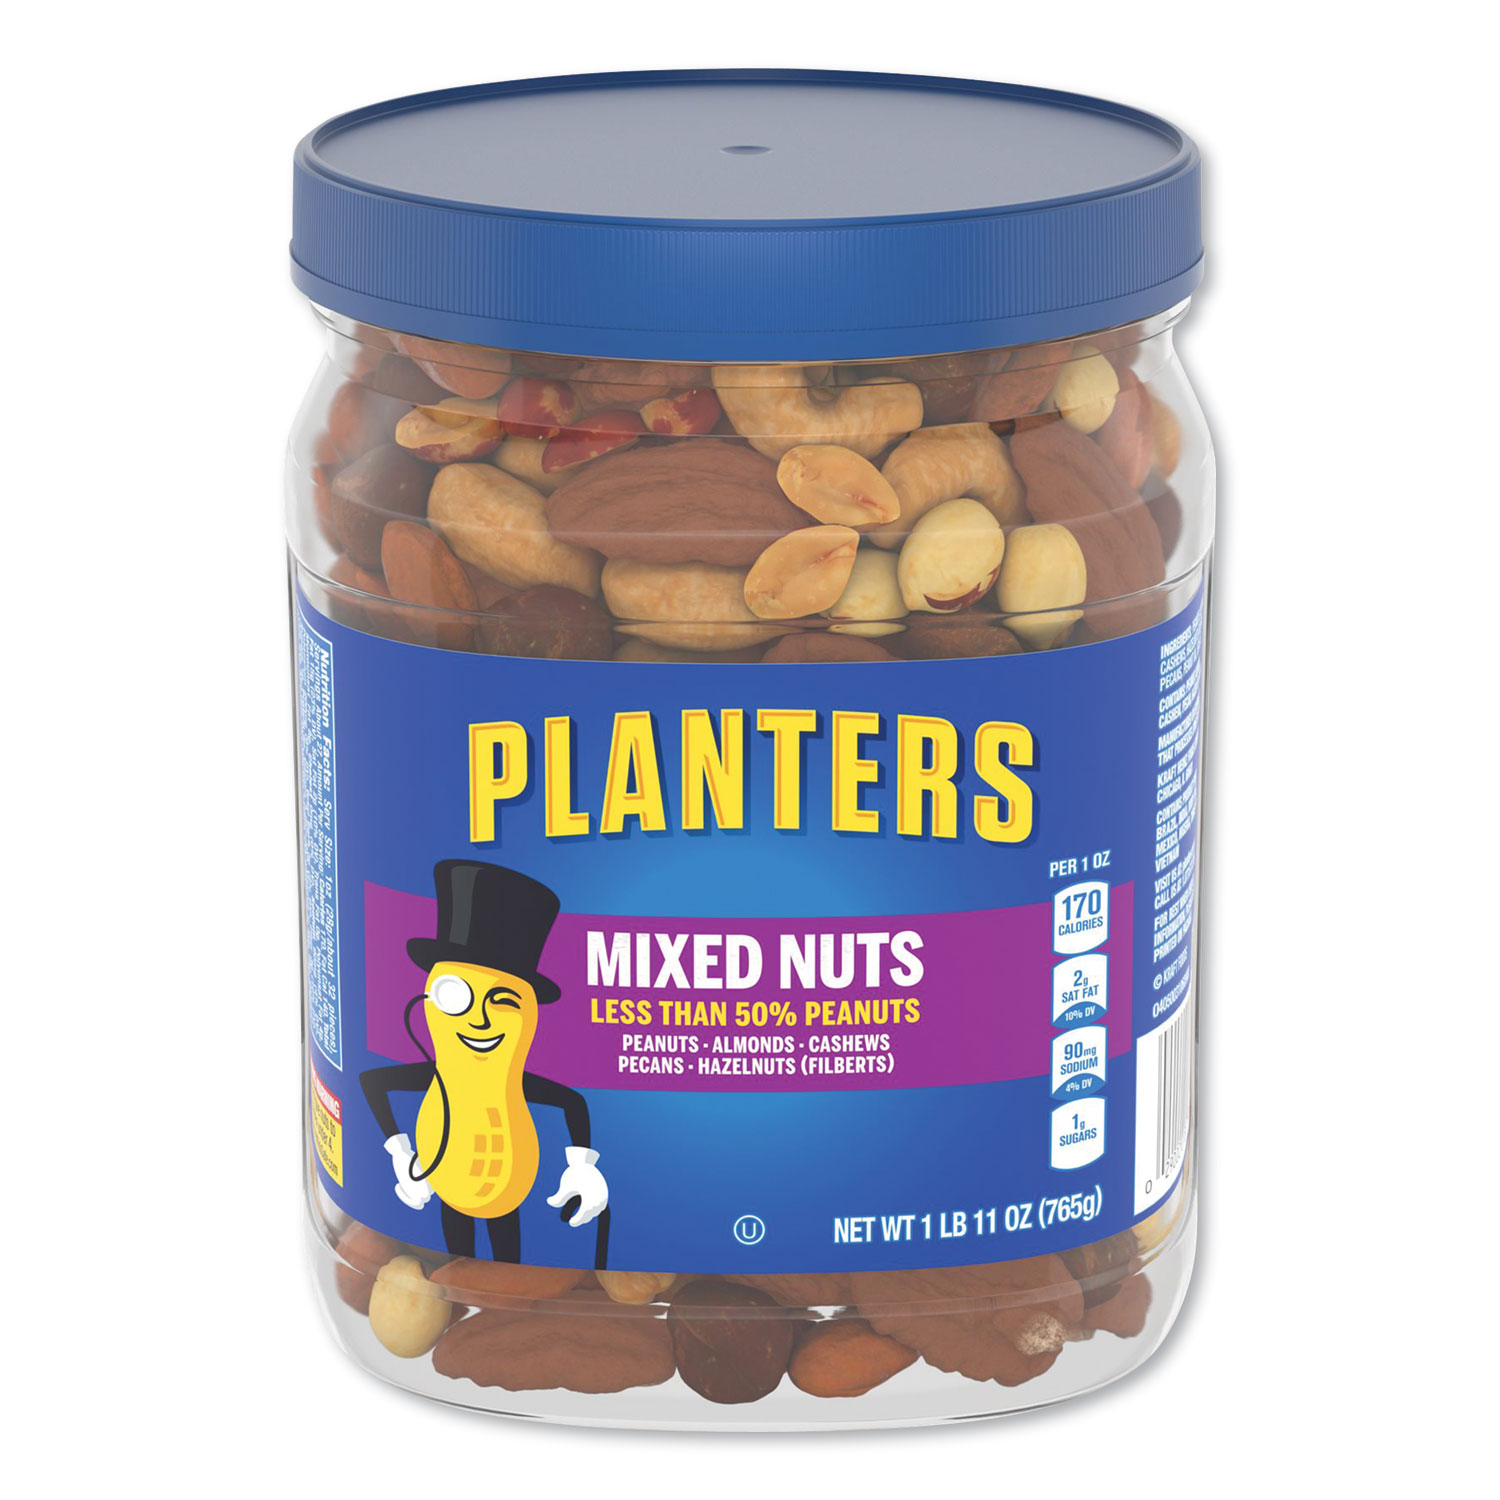 Planters® Salted Mixed Nuts, 27 oz Canister